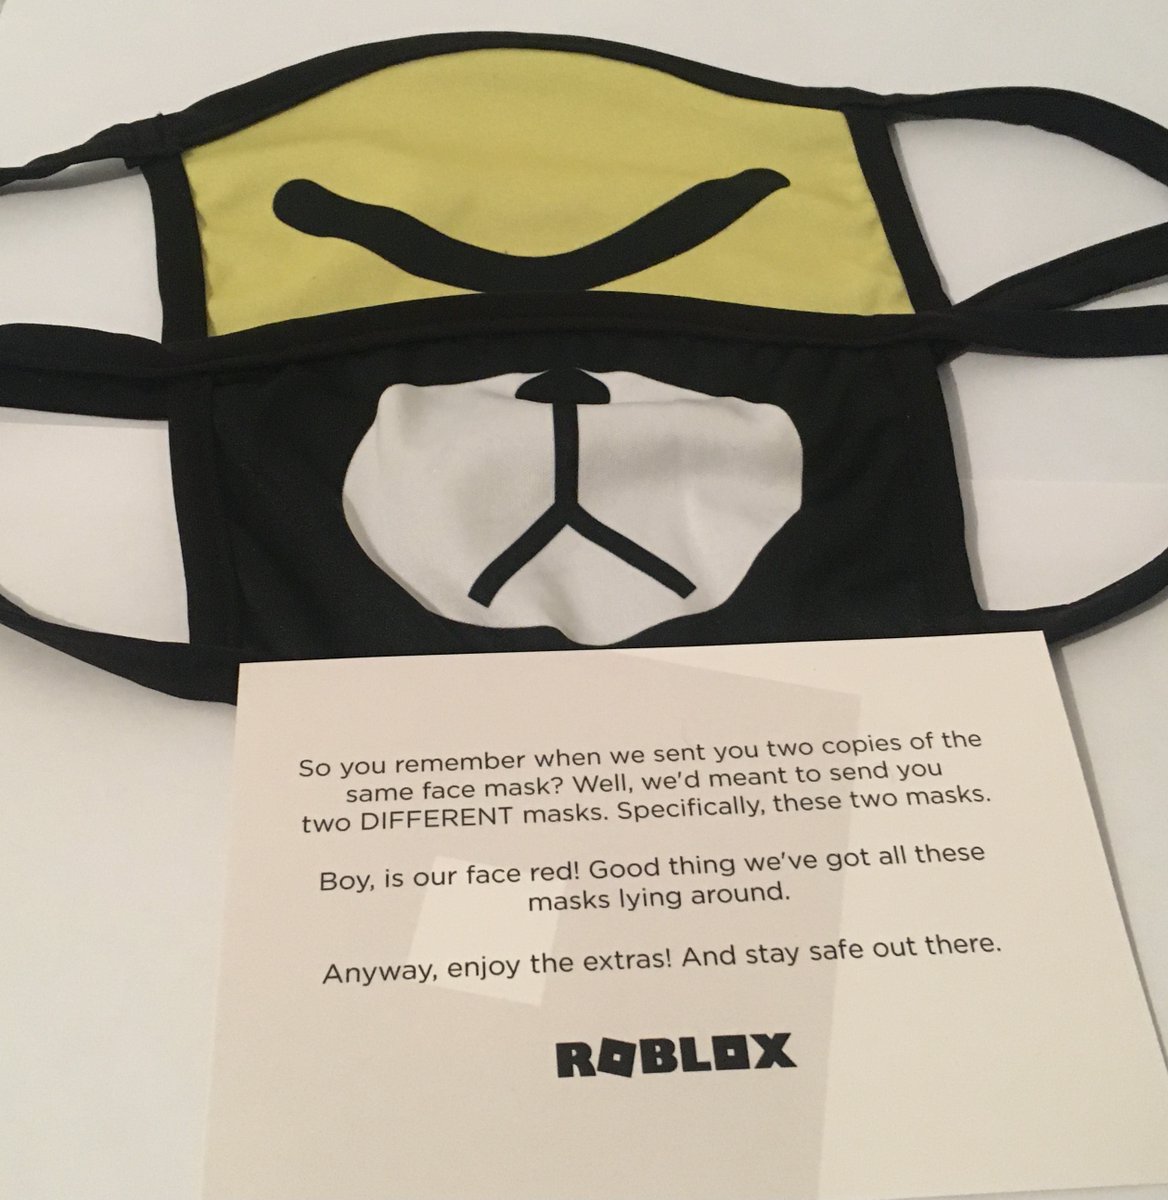 Muneeb Code Muneeb On Twitter Thanks So Much Roblox For The Extra Face Masks I Love The Bear One - roblox red bear face mask